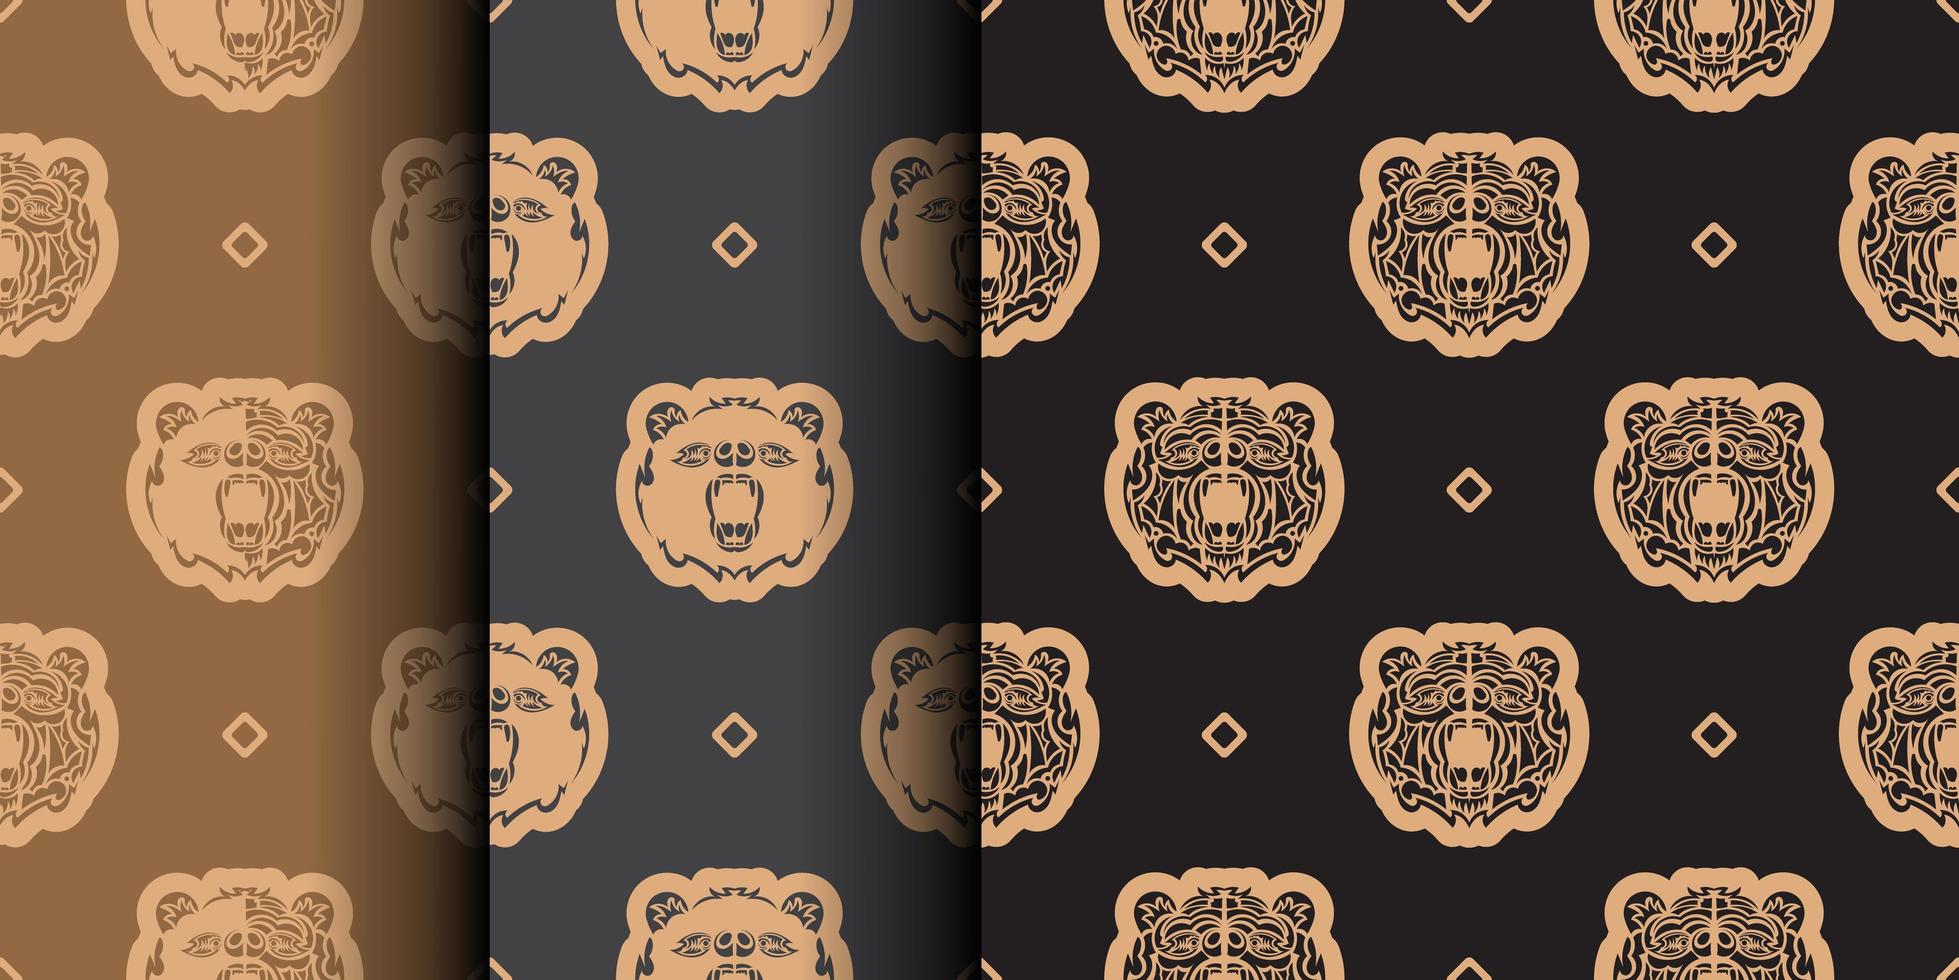 Set of Seamless background with BEAR FACE in a simple style. Suitable for backgrounds, prints, clothing and textiles. Vector